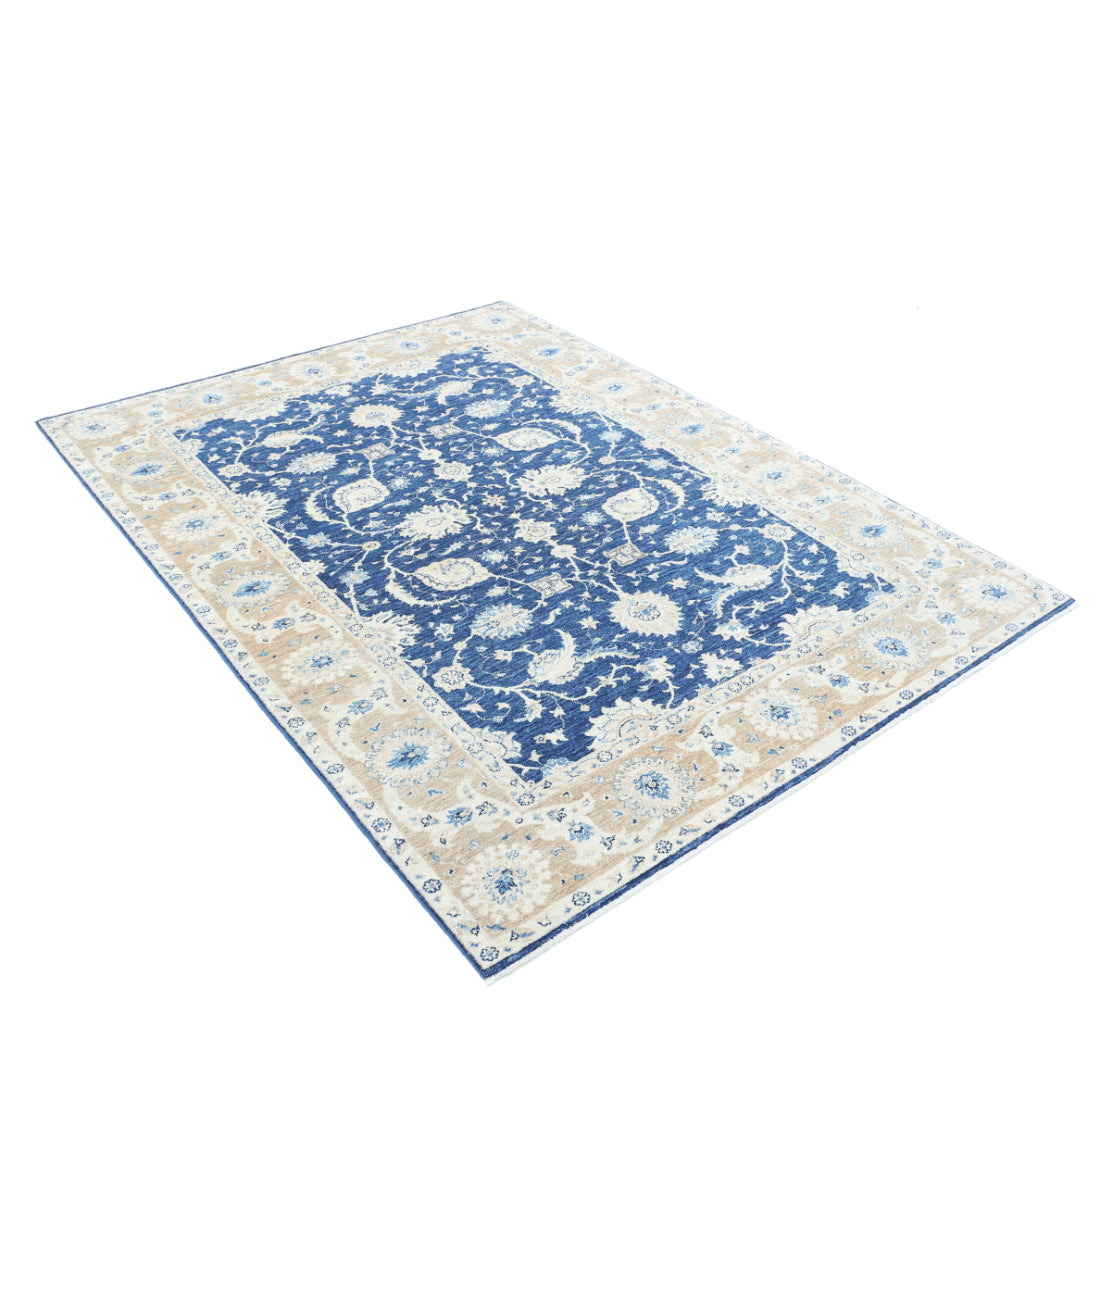 Hand Knotted Ziegler Farhan Wool Rug - 5'8'' x 7'6'' 5'8'' x 7'6'' (170 X 225) / Blue / Taupe